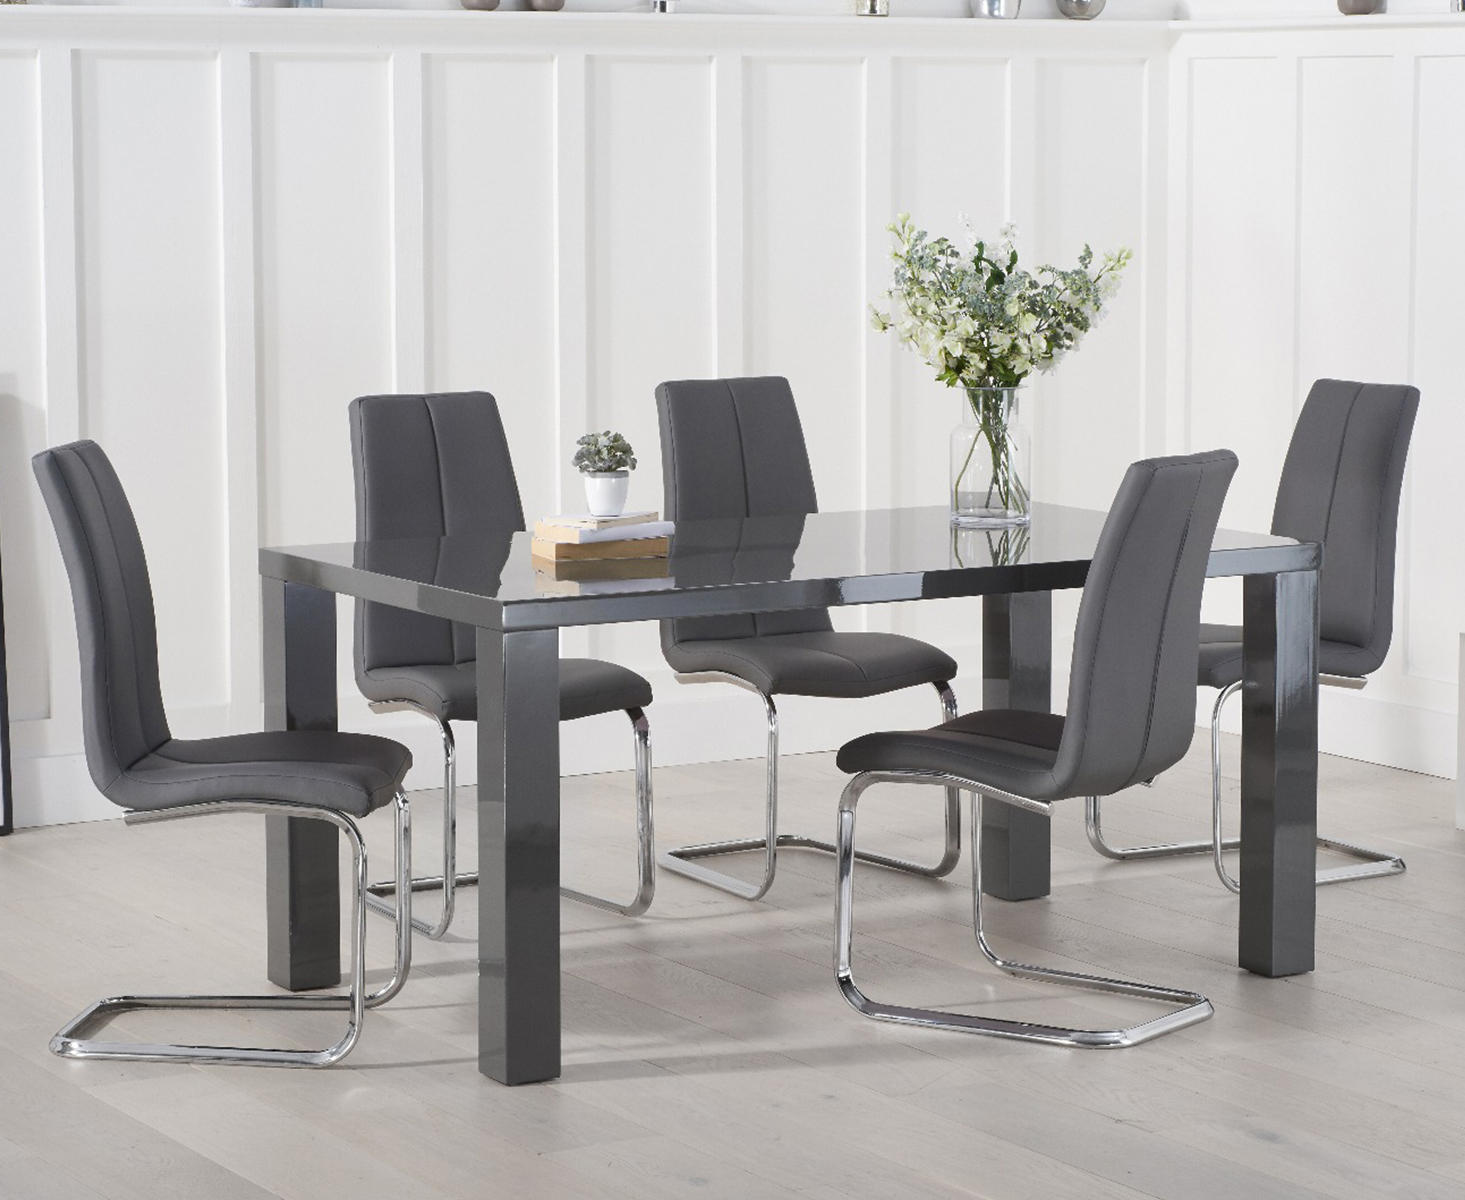 Seattle 160cm Dark Grey High Gloss Dining Table With 8 Grey Gianni Chairs